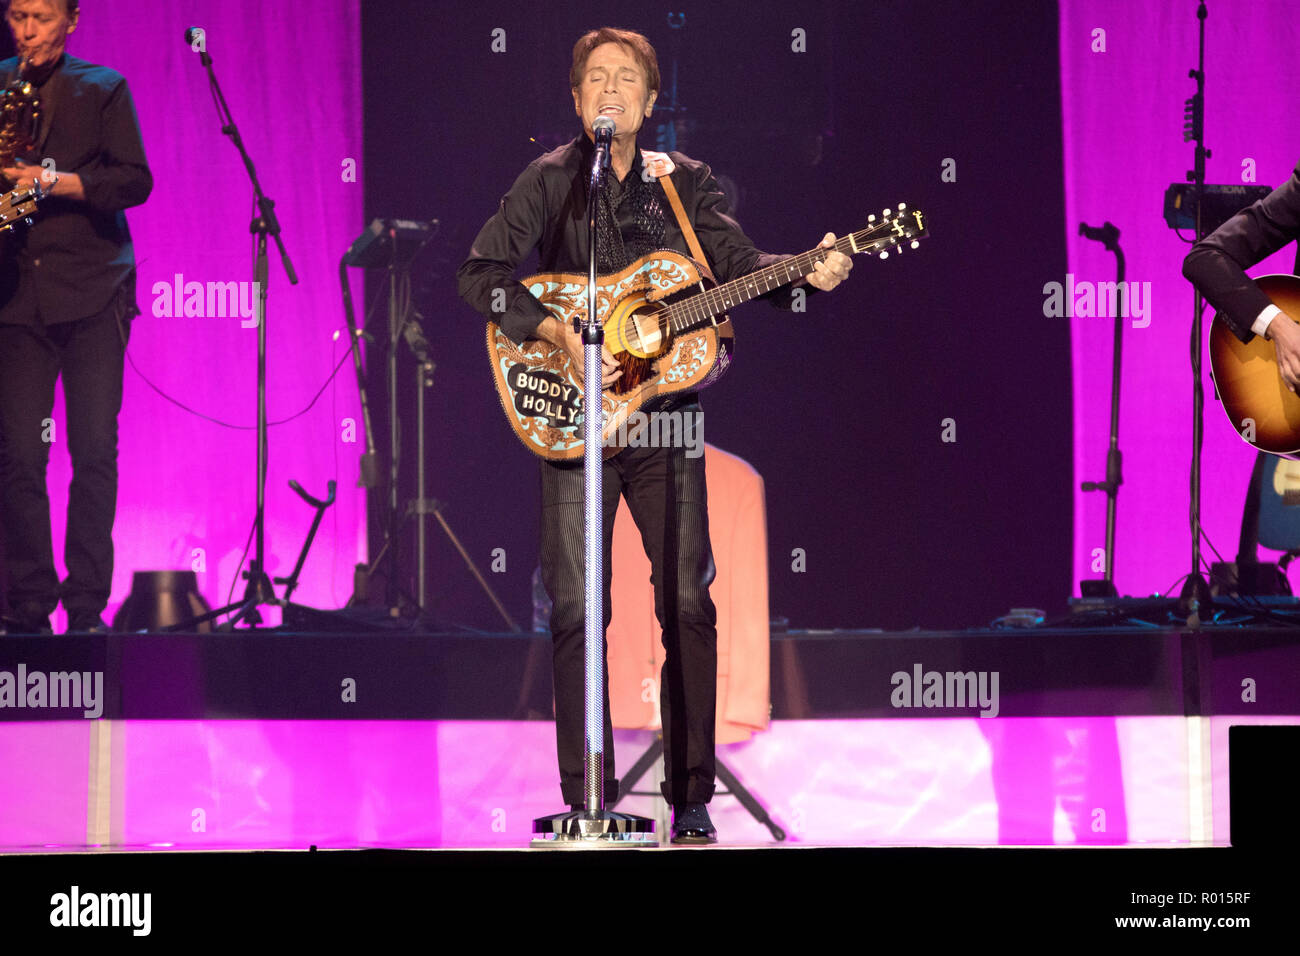 Sir Cliff Richard performs live on stage at the SSE Arena in Belfast, Northern Ireland, as part of his '58-18=60' tour.  Featuring: Cliff Richard Where: Belfast, Northern Ireland, United Kingdom When: 30 Sep 2018 Credit: WENN.com Stock Photo